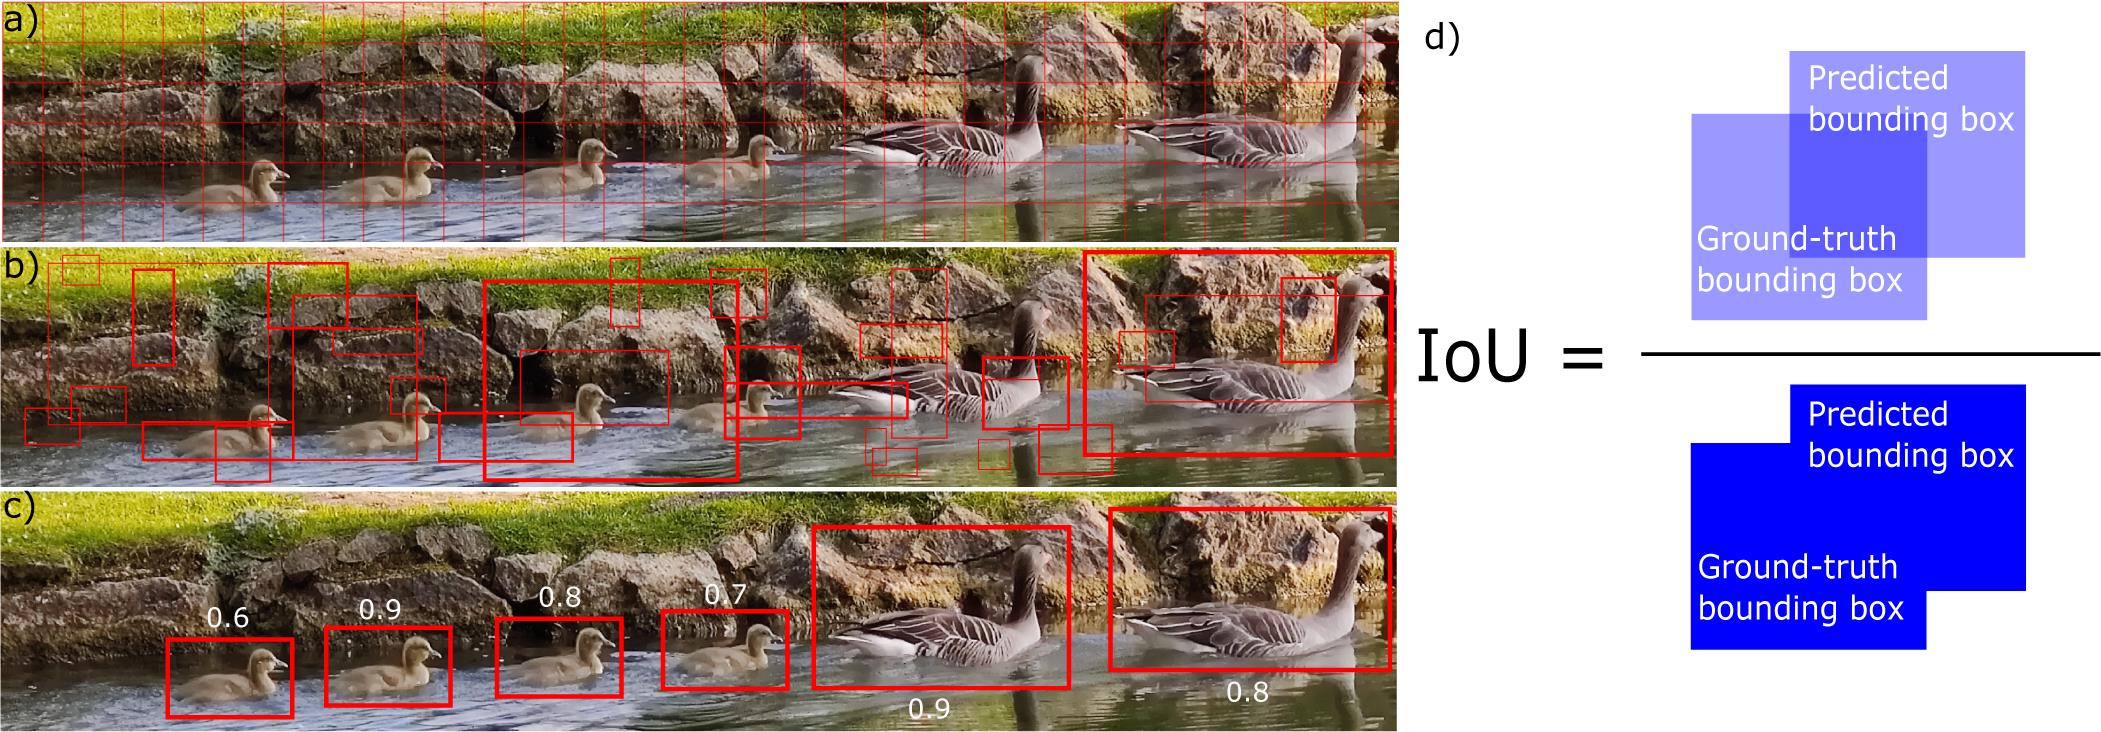 Step-wise illustration of the object detection method. The example image presents ducks creating and surfing on wakefields. (a) Split the image into small grid cells; (b) predict bounding boxes and confidences for each class; (c) final detected objects with confidences; (d) bounding box predicted by the object detector versus the ground-truth bounding box labelled manually. IoU is defined as their area of intersection divided by their area of union, where an ideal object detector would have IoU = 1.